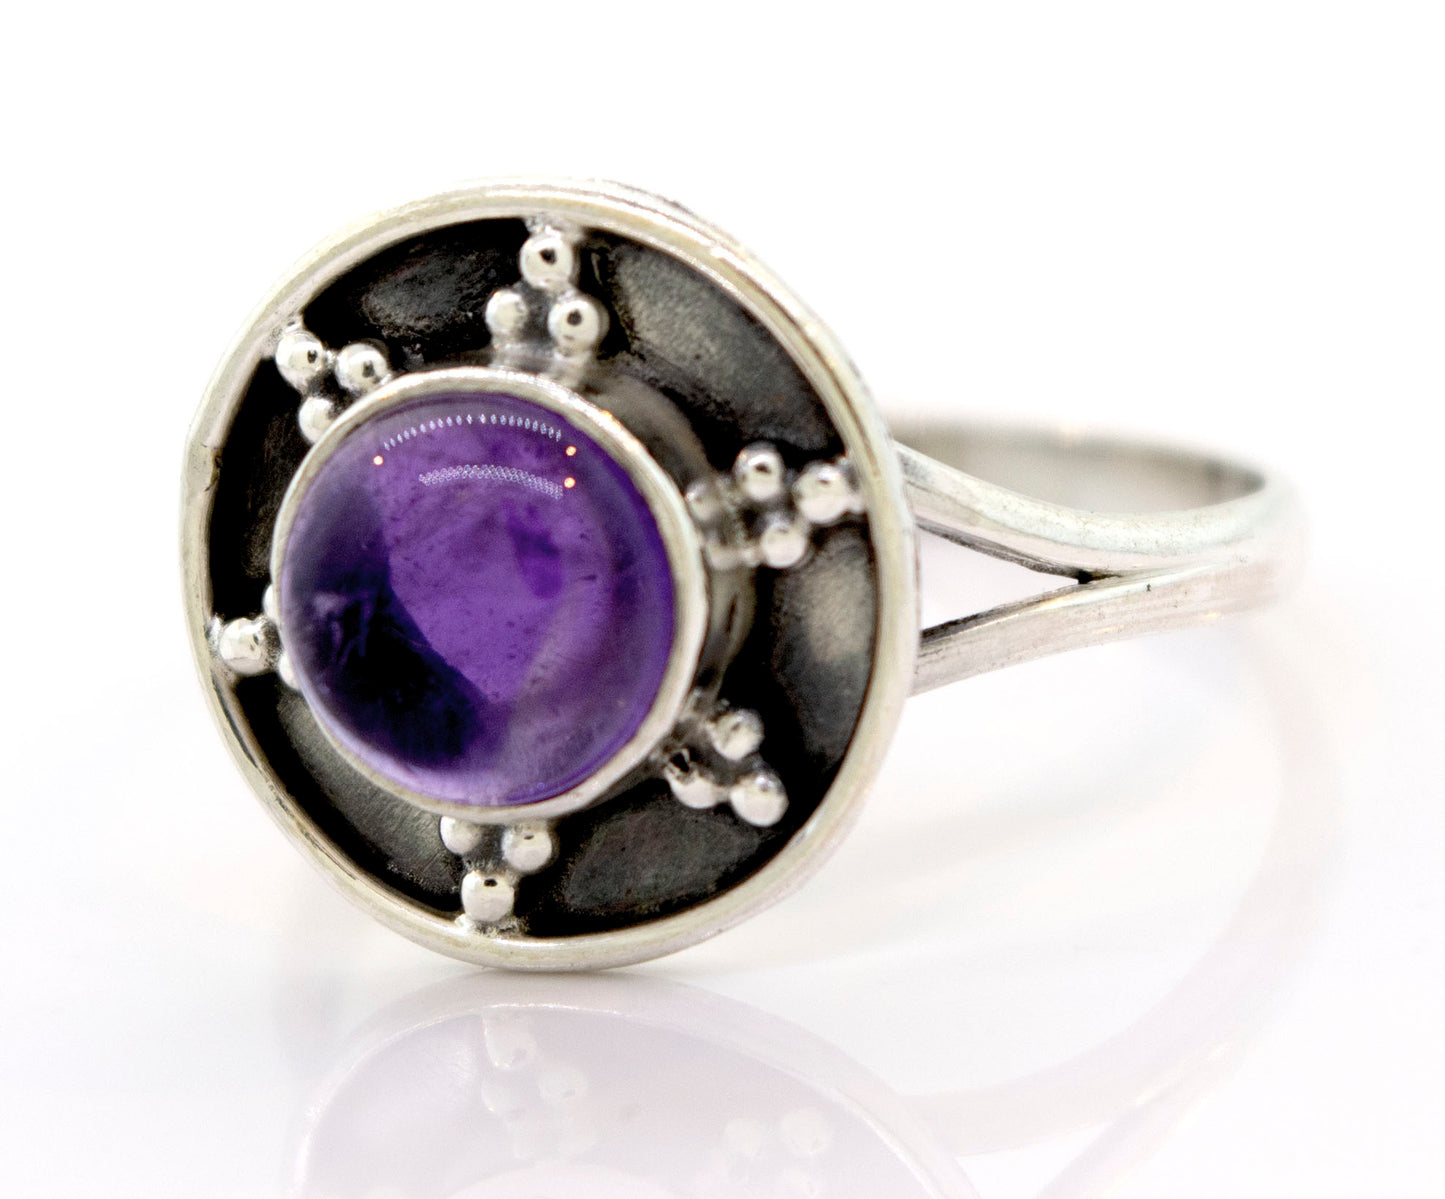 
                  
                    Gemstone Ring With Unique Oxidized Design featuring a round purple gemstone set in an ornate circular bezel with small decorative silver beads, crafted from oxidized sterling silver for a vintage touch.
                  
                